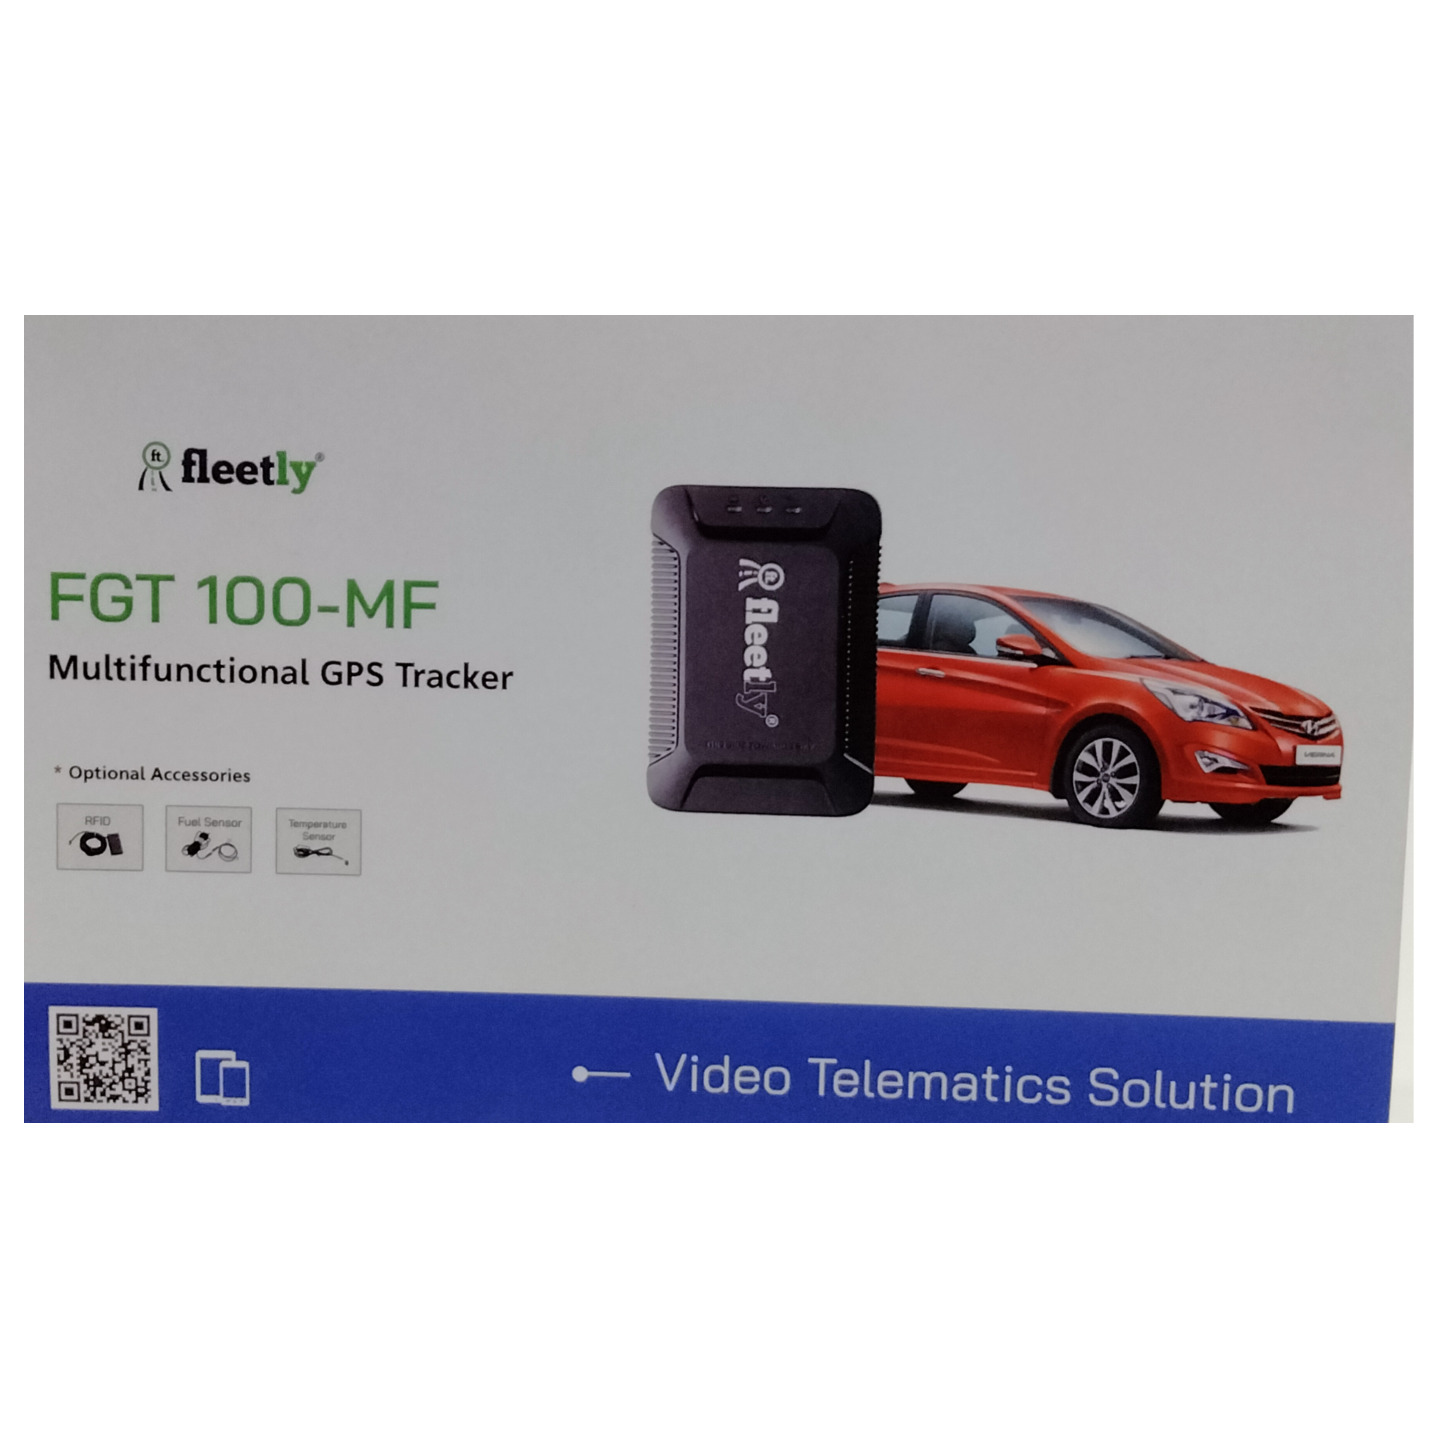 FGT-100 MF premium GPS tracker for all types of vehicles